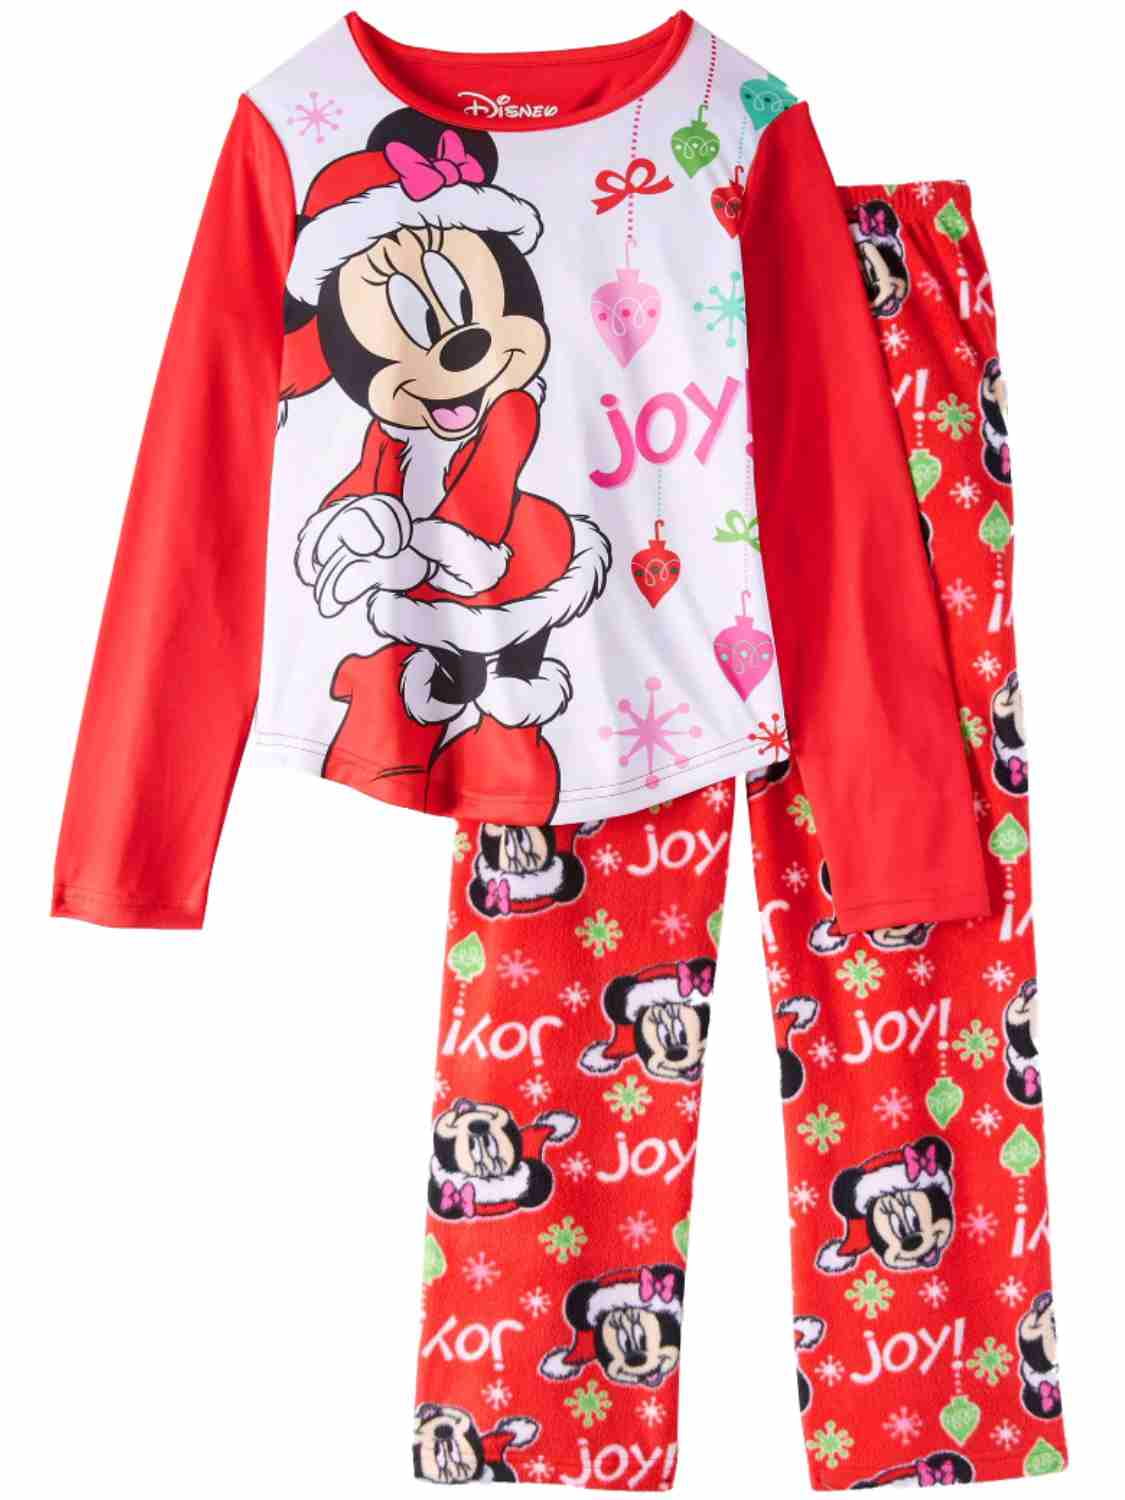 Disney Girls Red Santa Minnie Mouse Christmas Holiday